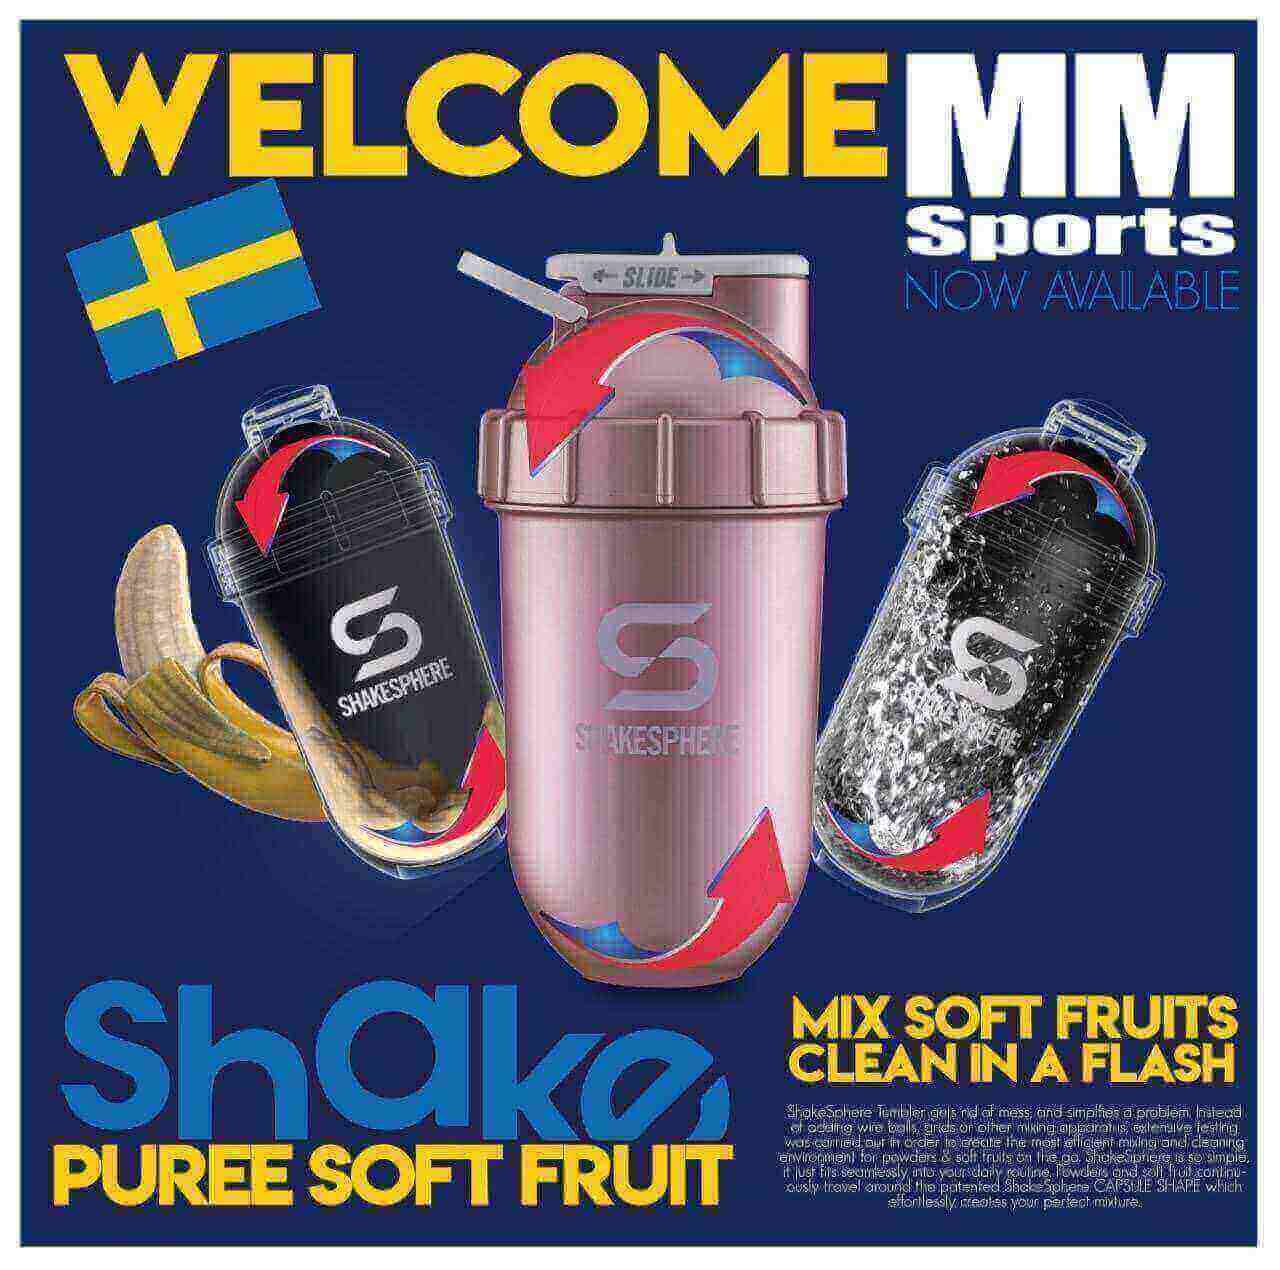 Welcome MM Sports Sweden